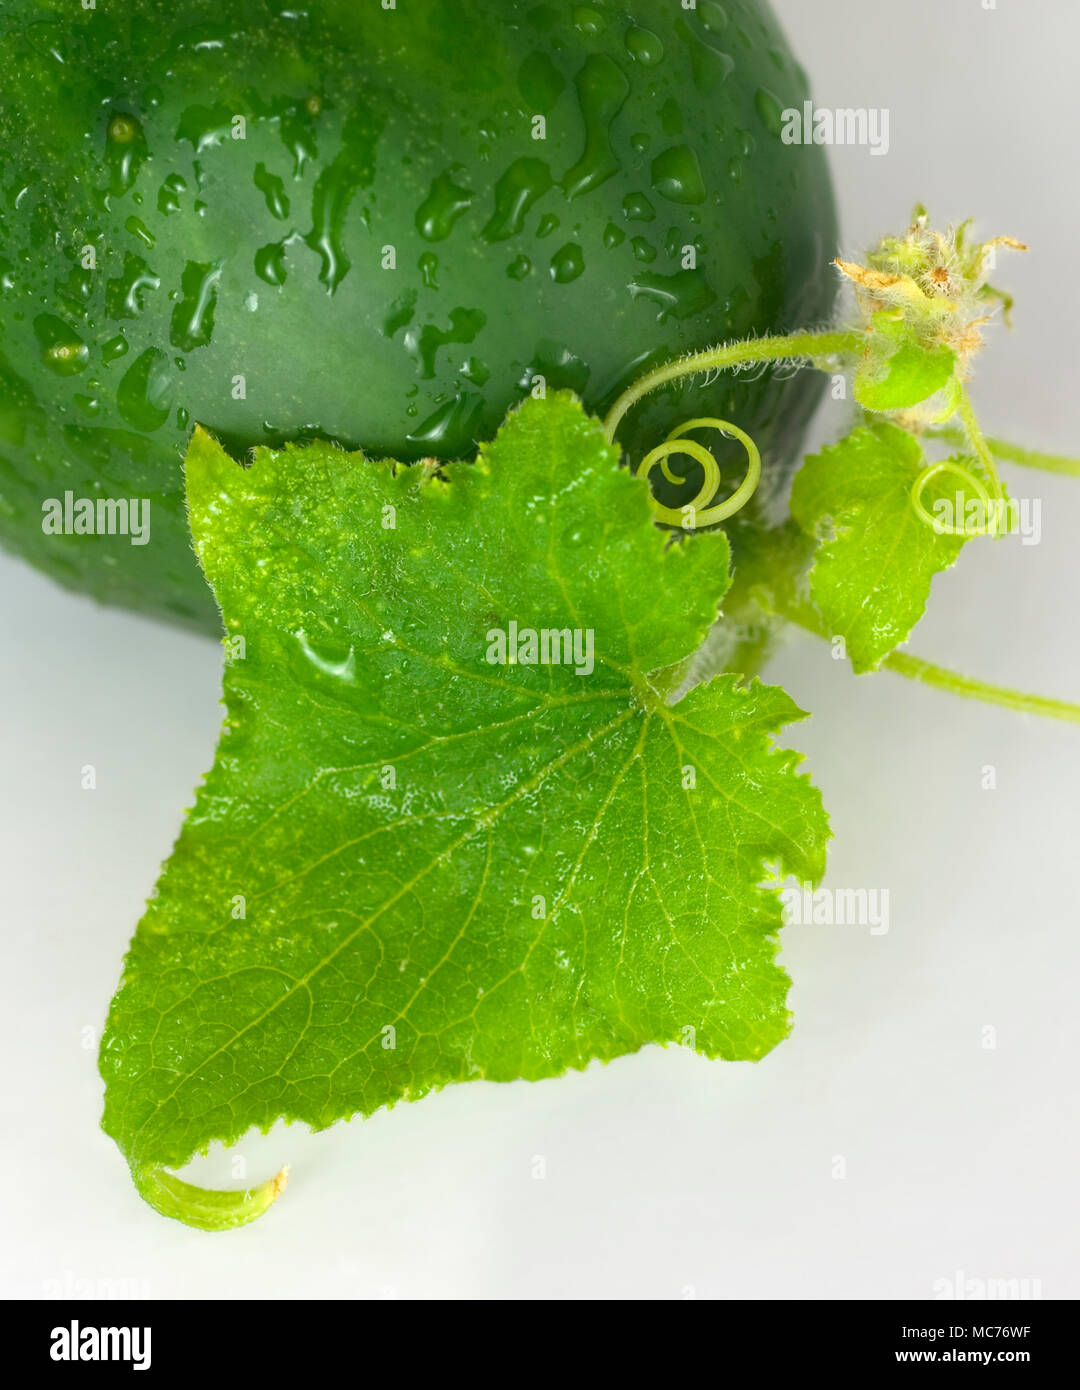 A close up of a cucumber and its leaf and tendrils. Stock Photo